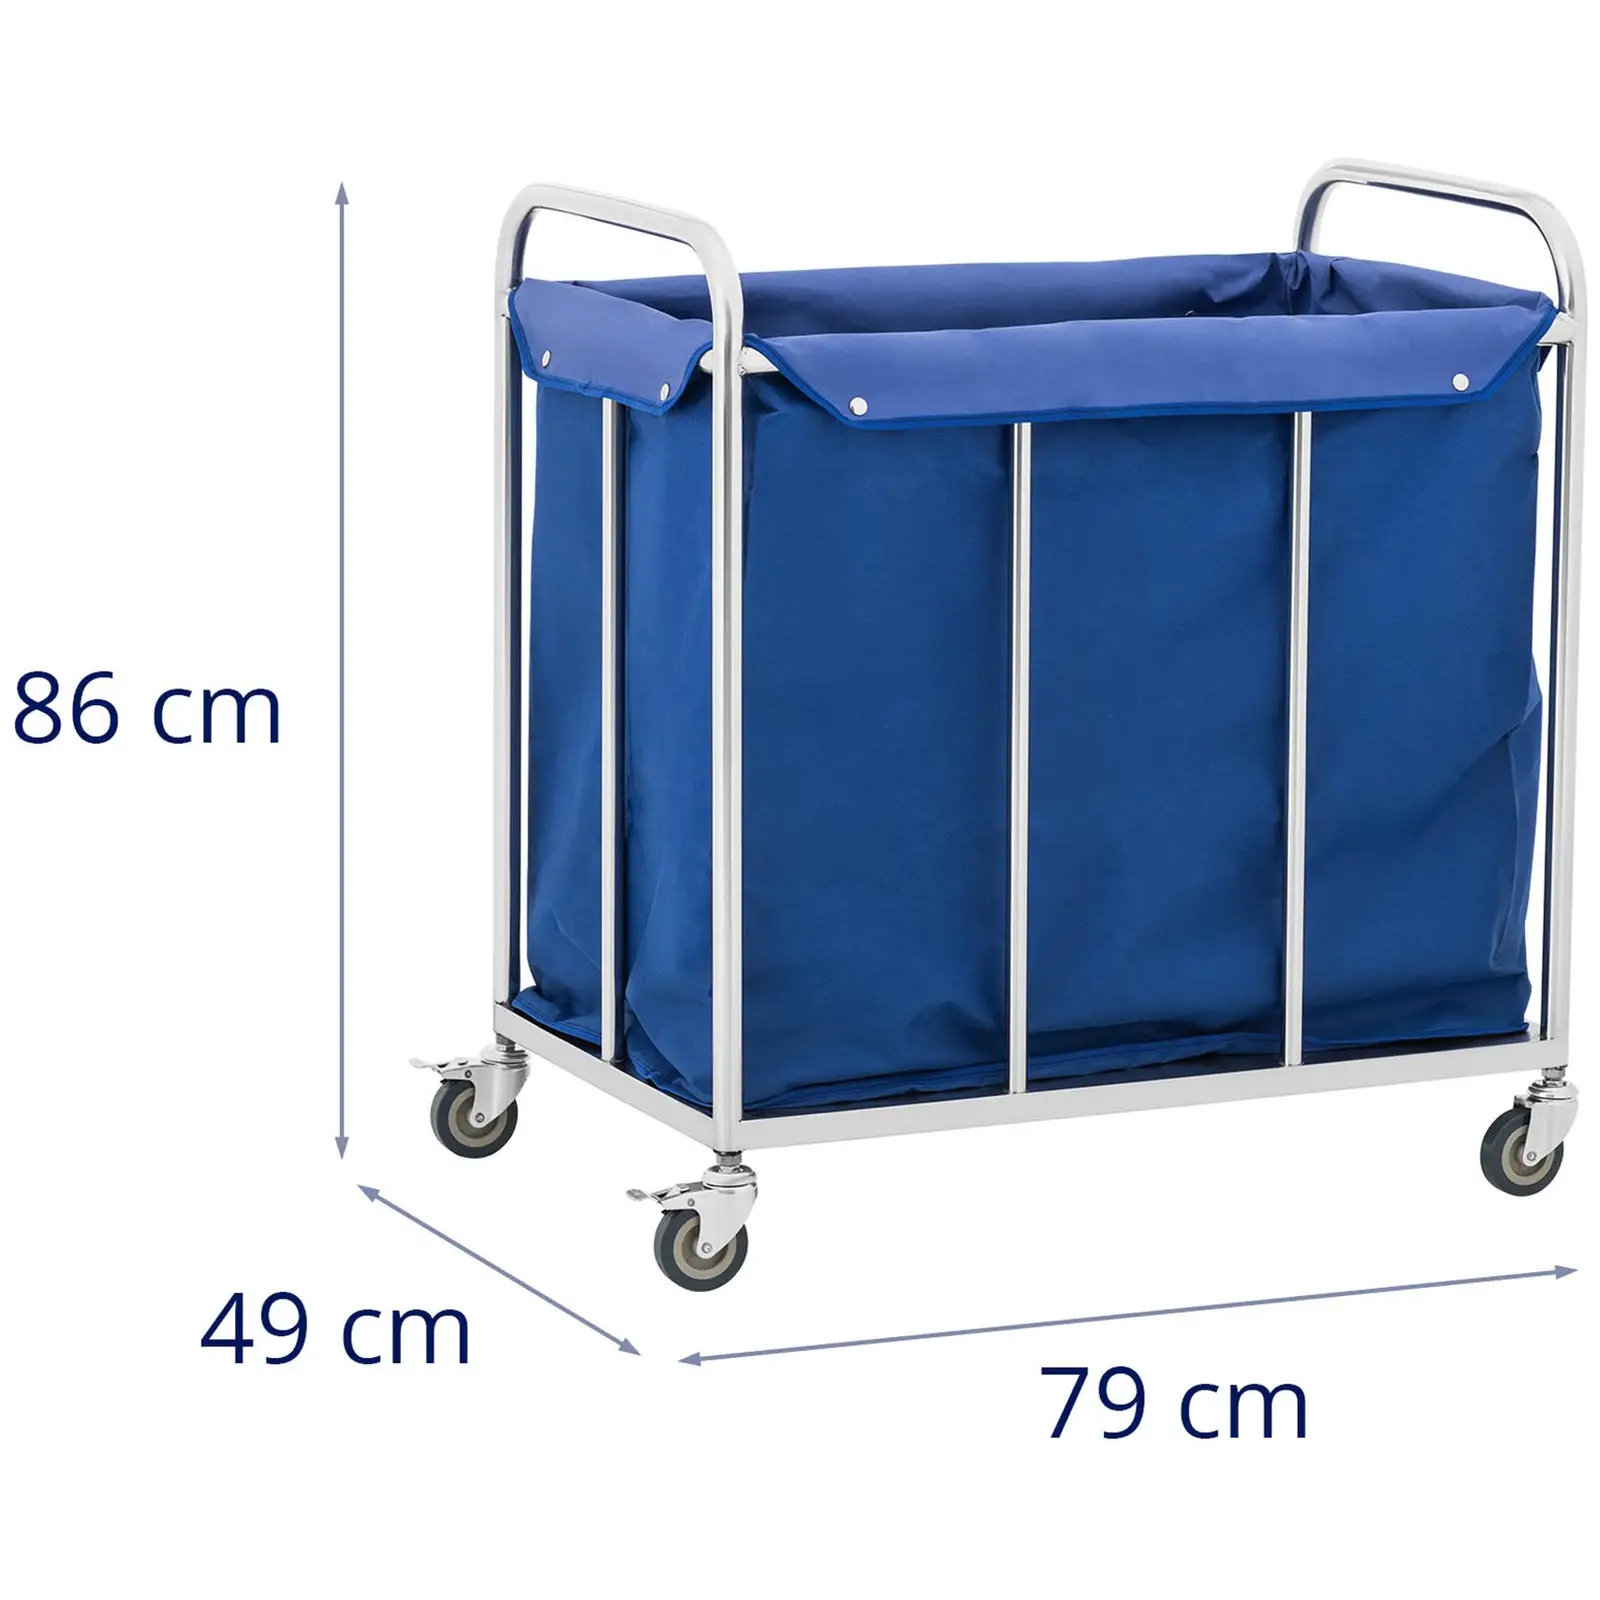 Laundry Trolley - stainless steel - 50 kg